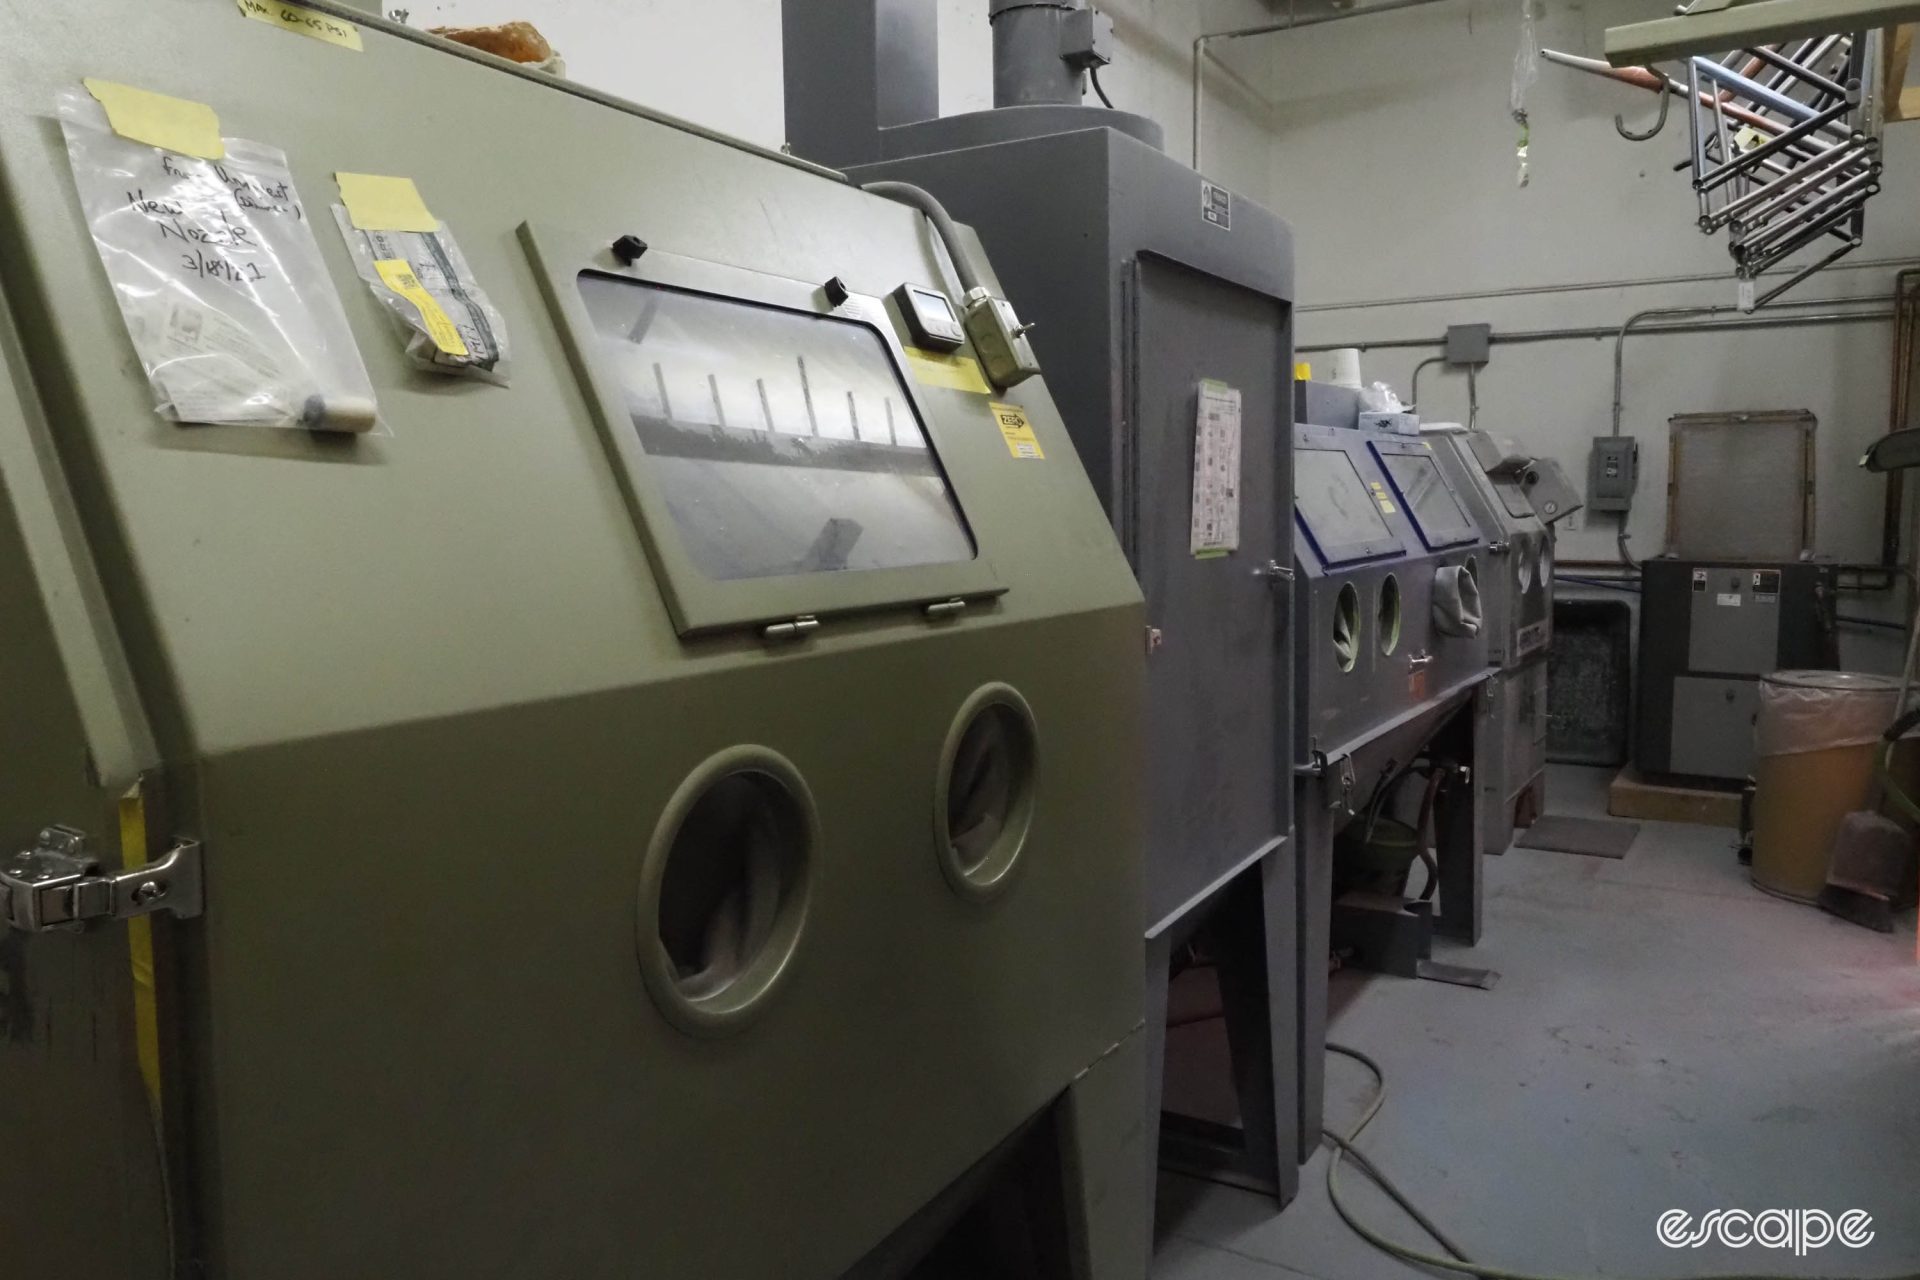 A large bead-blasting machine sits in front of several others. The olive-green machine has two holes for an operator to put their hands in to move the frame around inside.